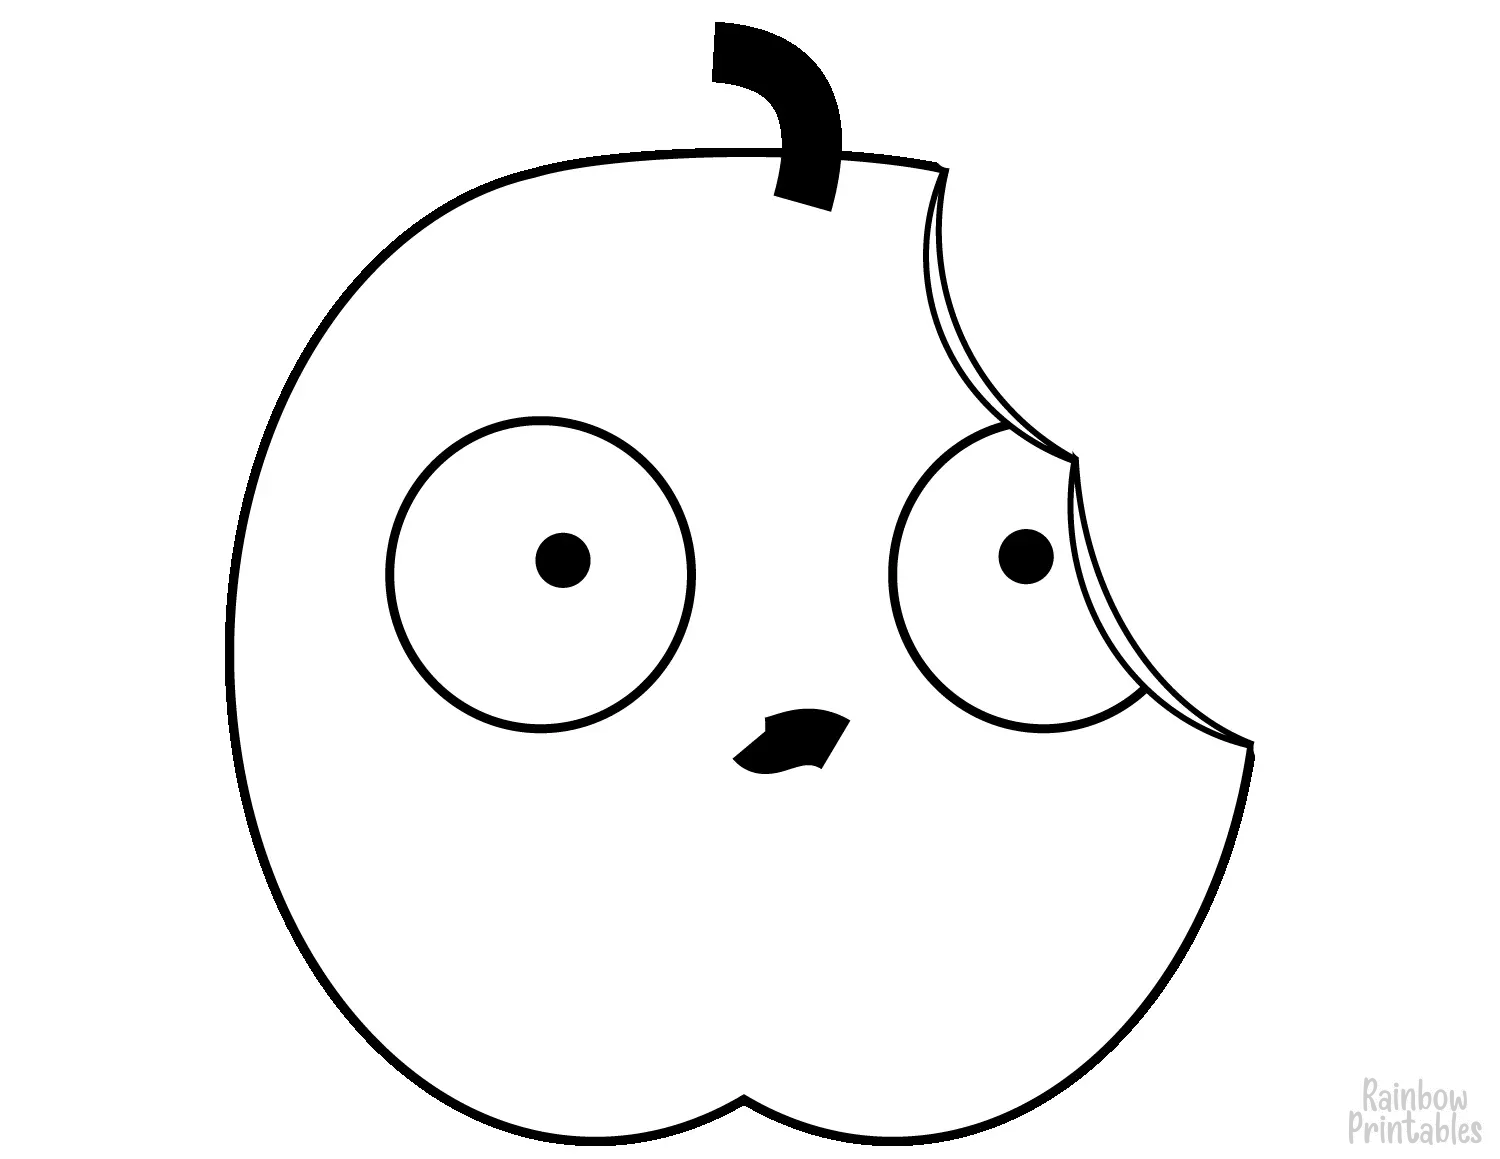 Line Drawing BITTEN SUPRISED APPLE FRUIT Coloring Pages for Kids Art Project